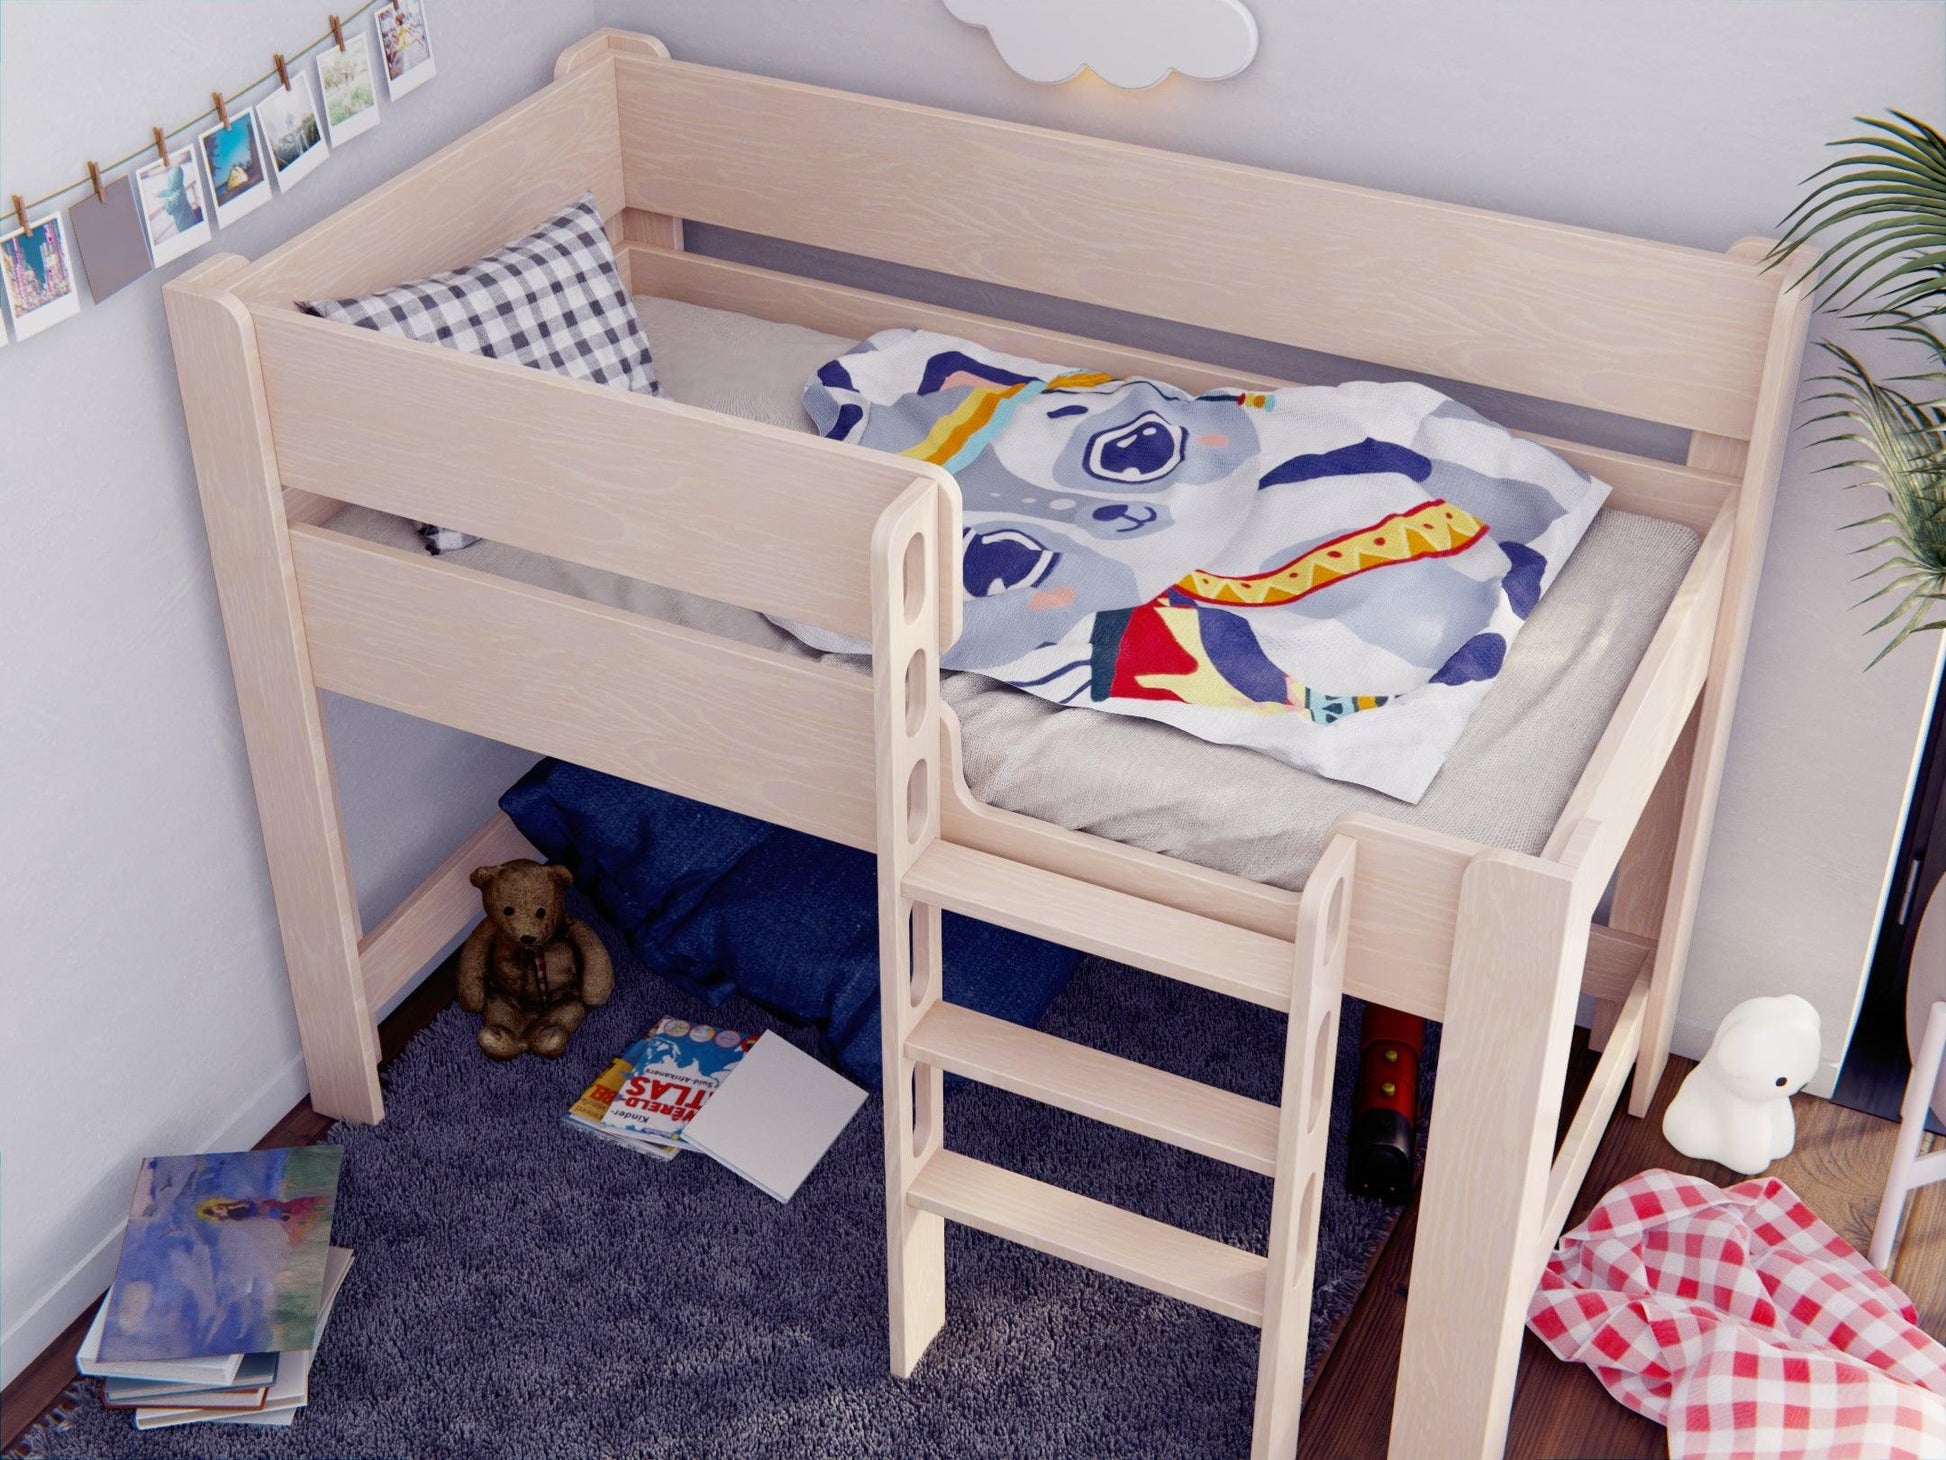 Upgrade bedtime with our wooden low loft bed, designed for sweet dreams and creative play.